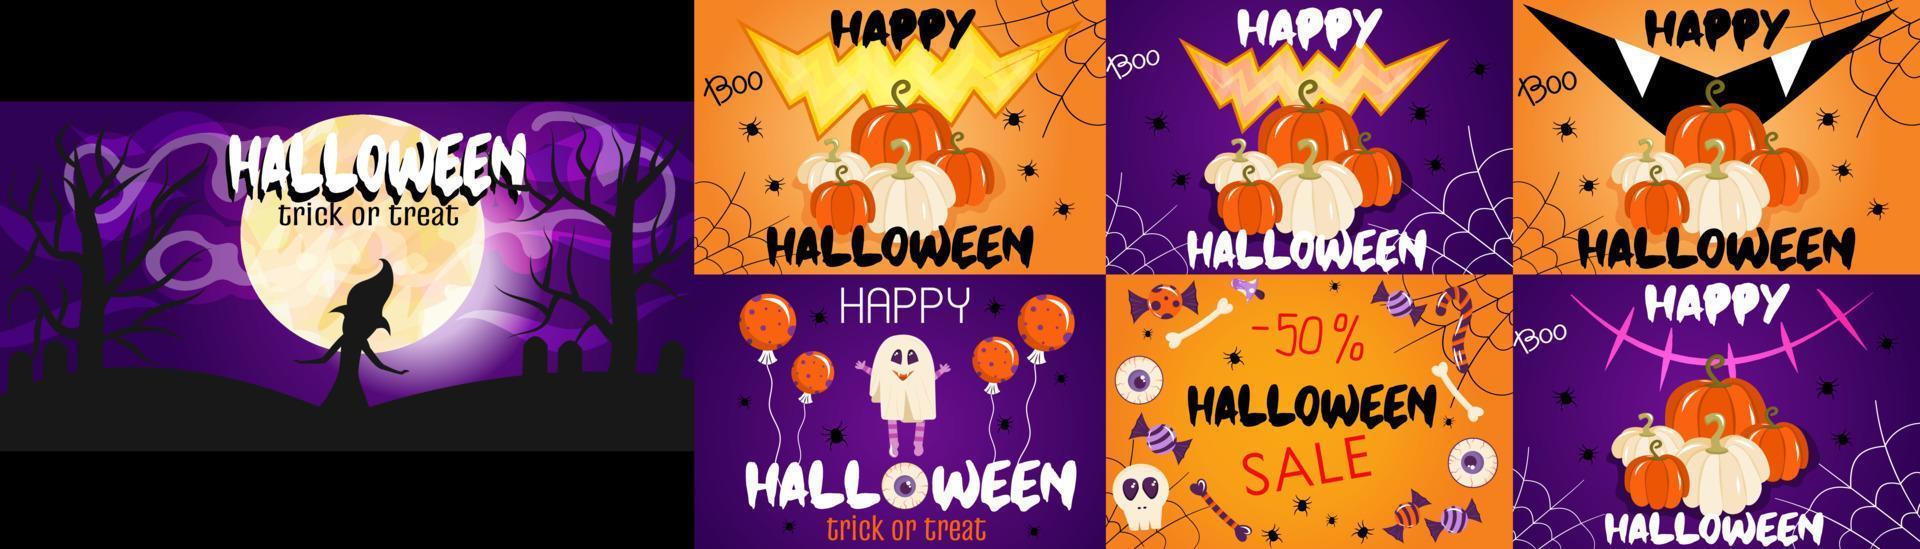 A set of banners for Halloween with the moon, pumpkins, spiders. Banners for invitations, decor with sweets, cobwebs. Purple and orange halloween backgrounds. Vector illustration in cartoon style